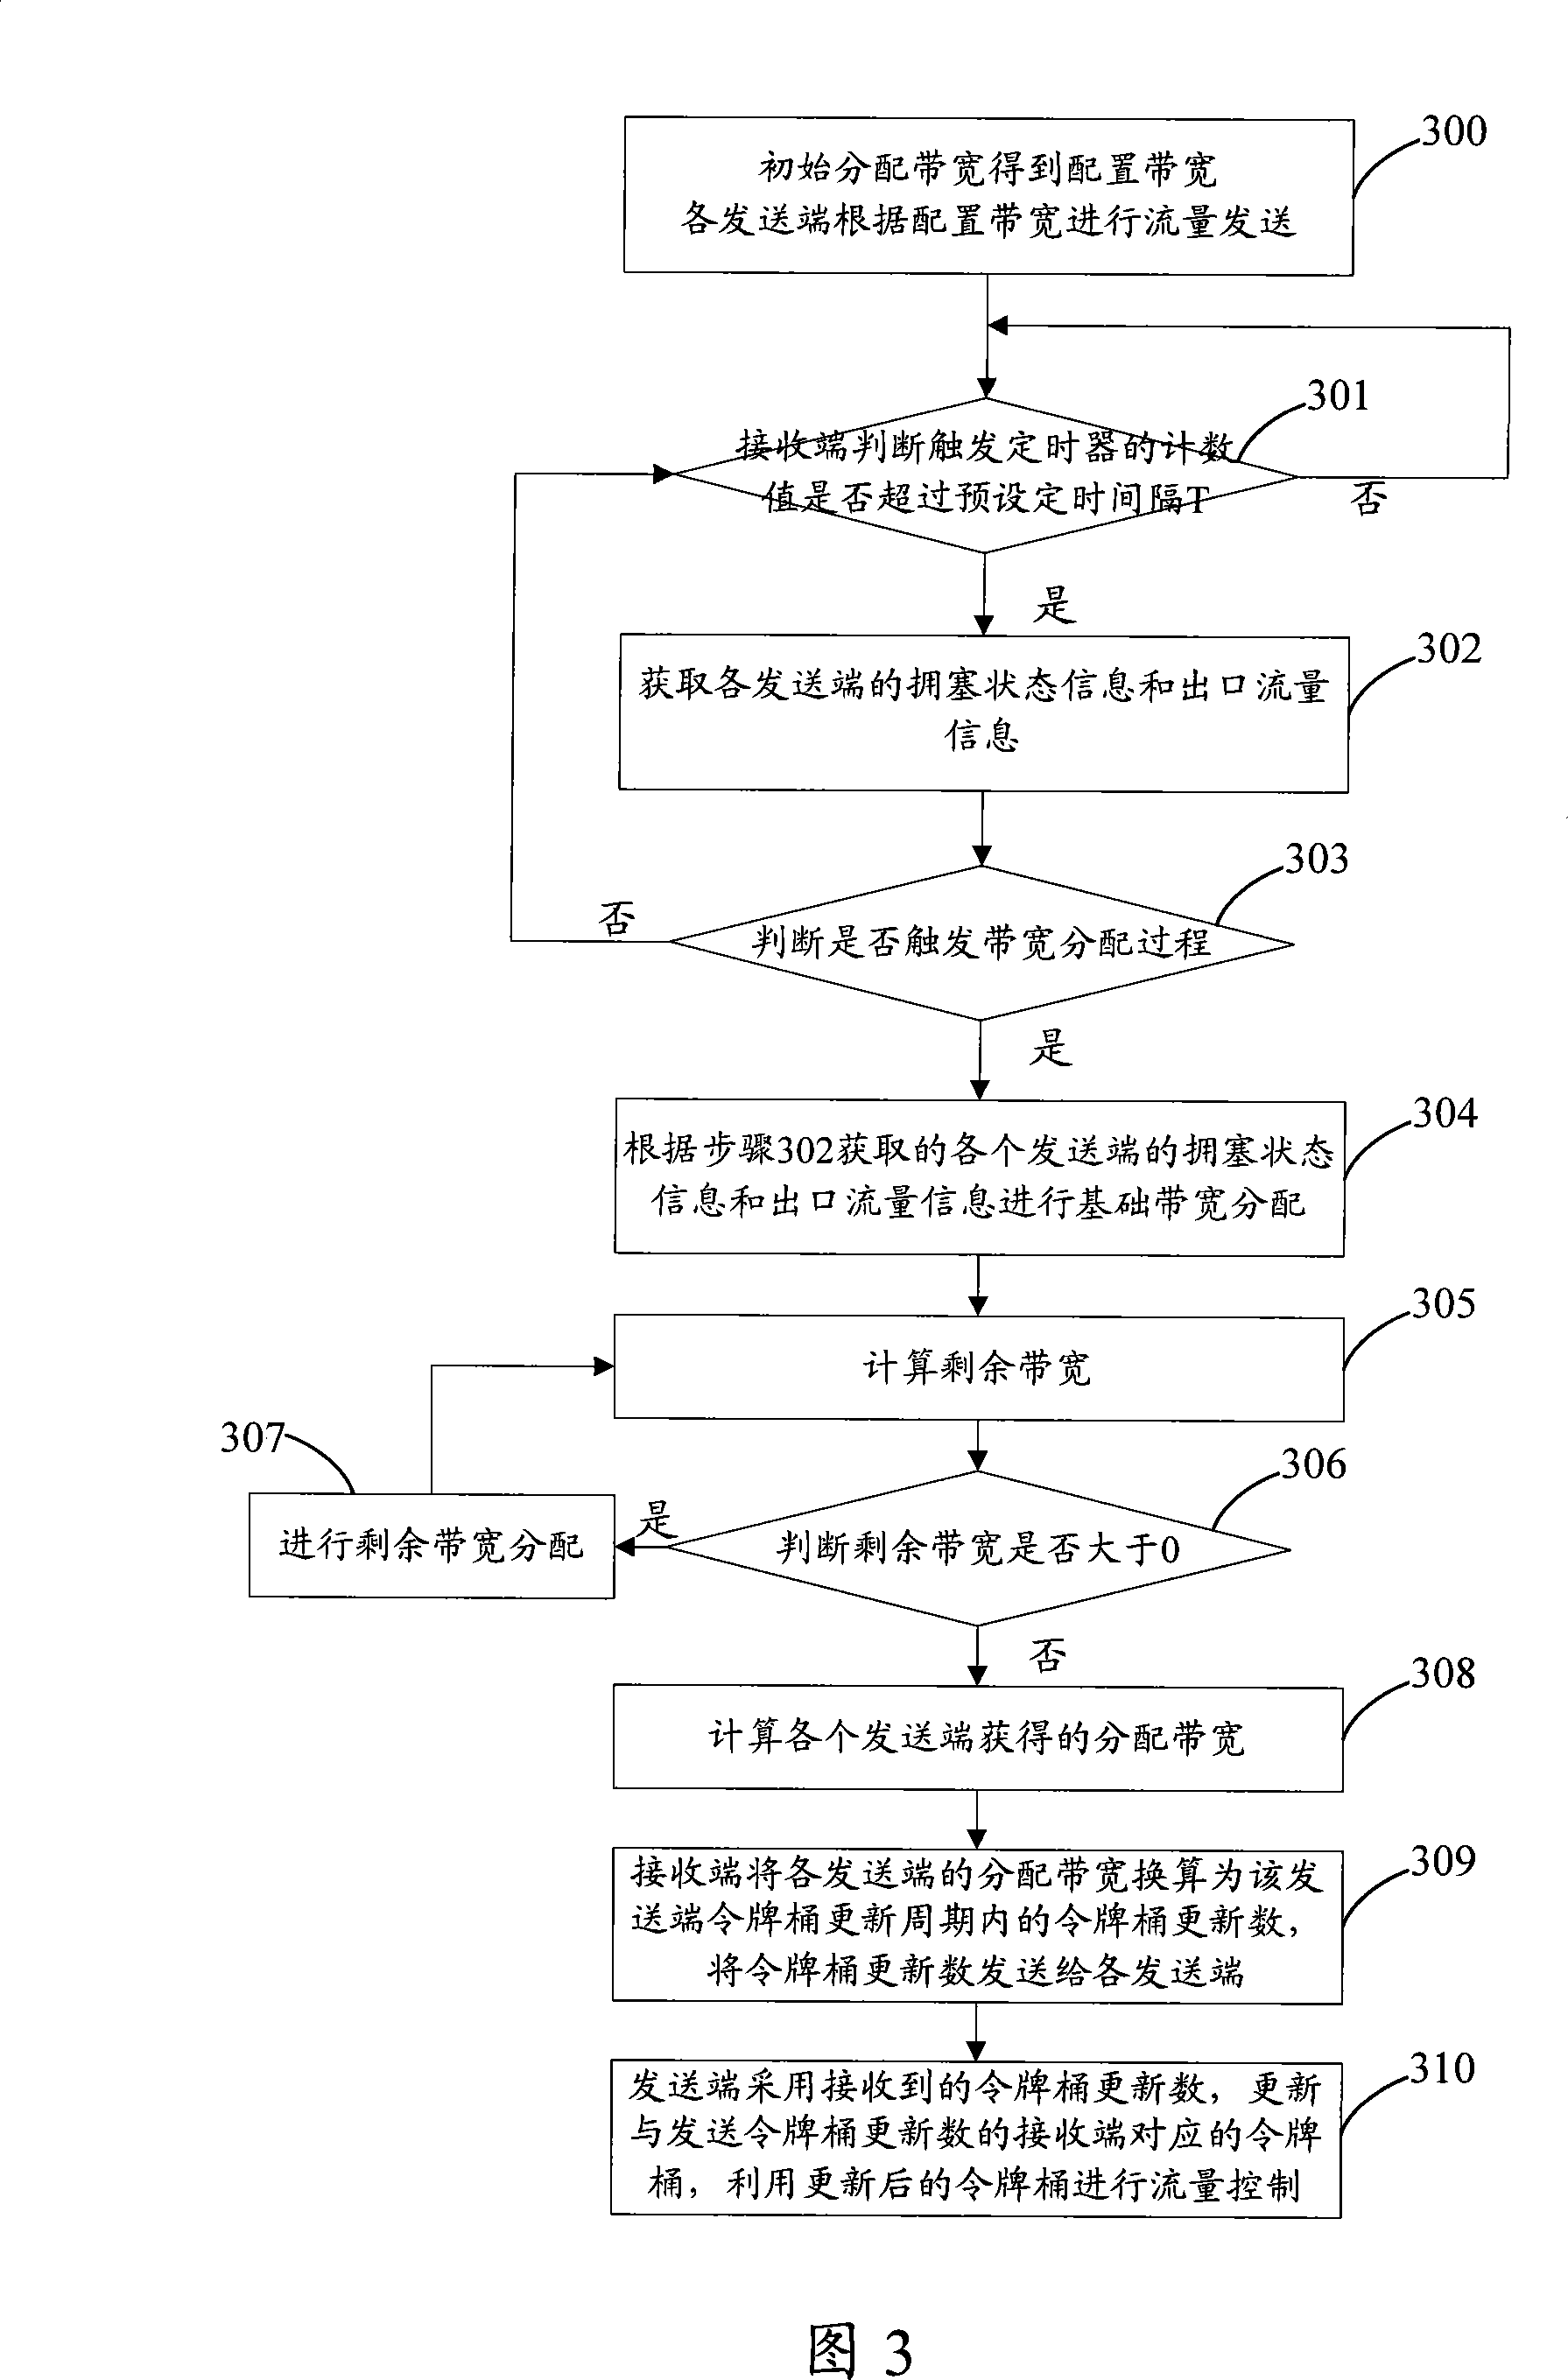 Traffic control method, system and device